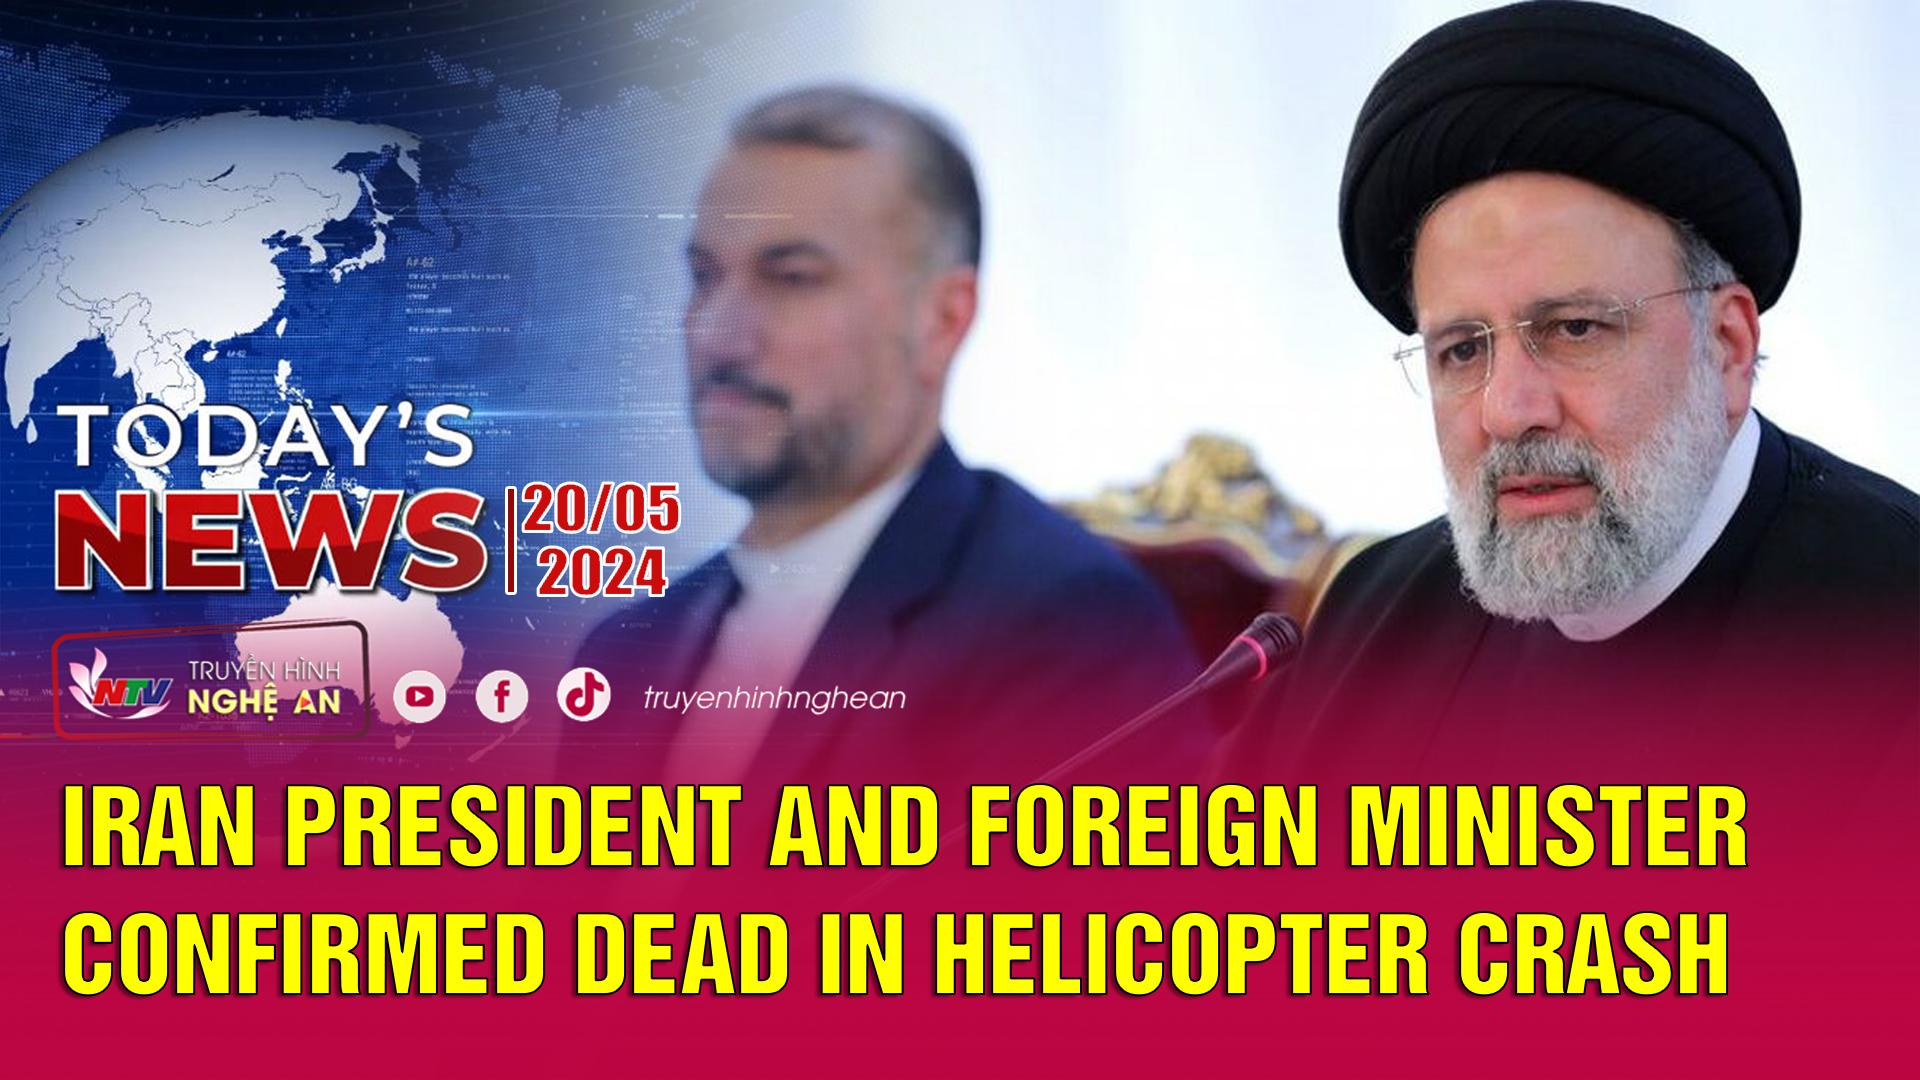 Today's News - 20/05/2024:  Iran president and foreign minister confirmed dead in helicopter crash